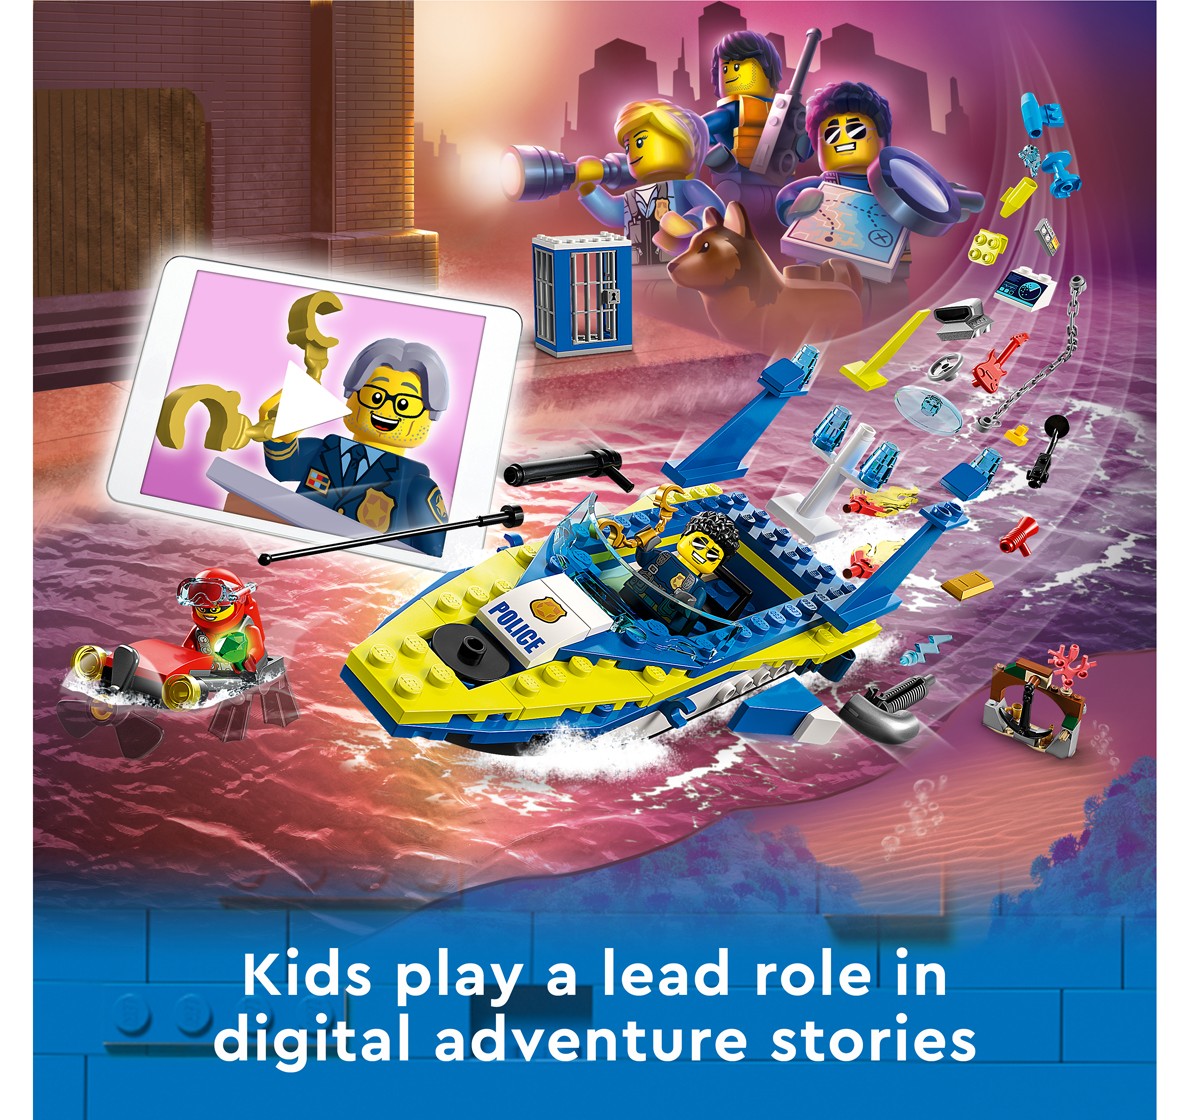 Lego City Water Police Detective Missions Interactive Digital Building Toy Set for Kids, Boys, and Girls Ages 6+ (278 Pieces)